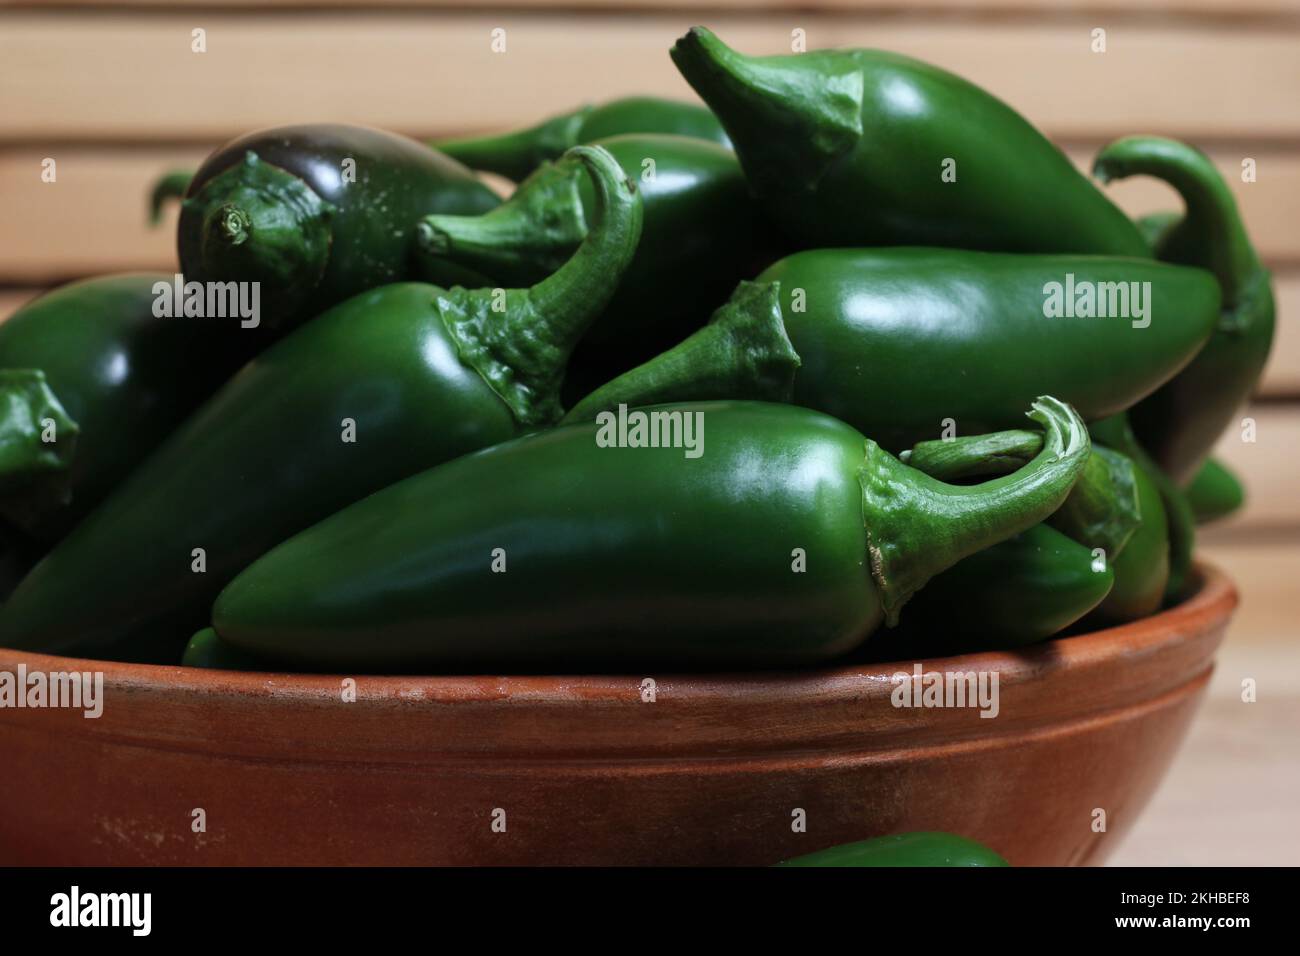 Bowl of Fresh Green Jalapeno Chili Peppers in Rustic Kitchen Stock Photo